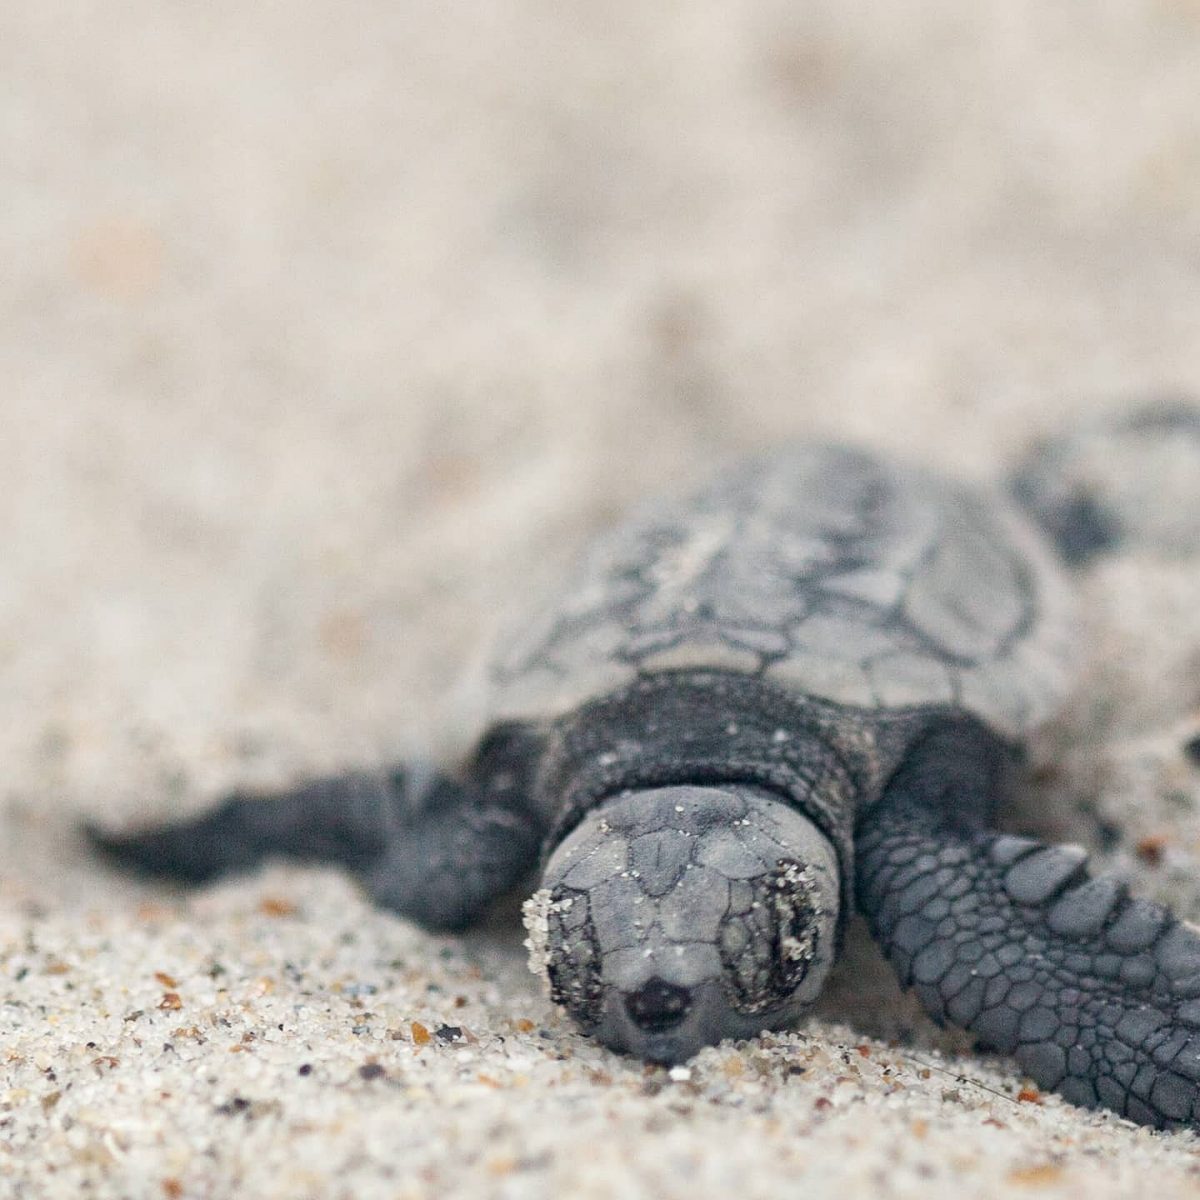 Sea turtle hatchling in the sand.